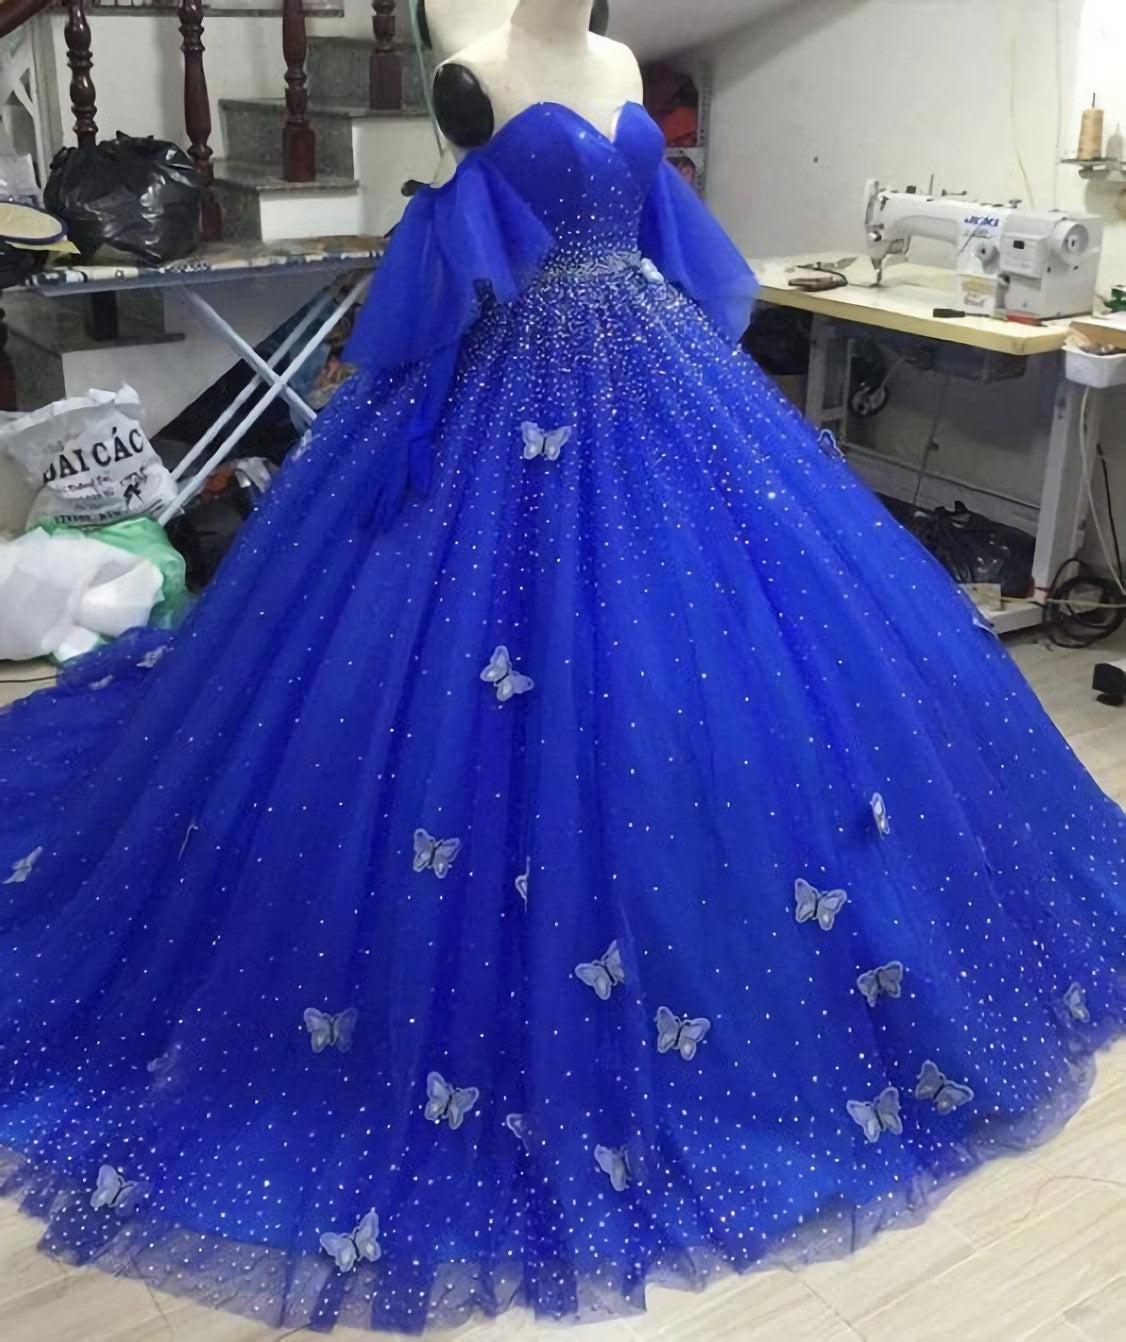 Elegant Quinceanera Dresses, Lace Appliques Tulle Ball Gown Prom Dress, Evening Dress